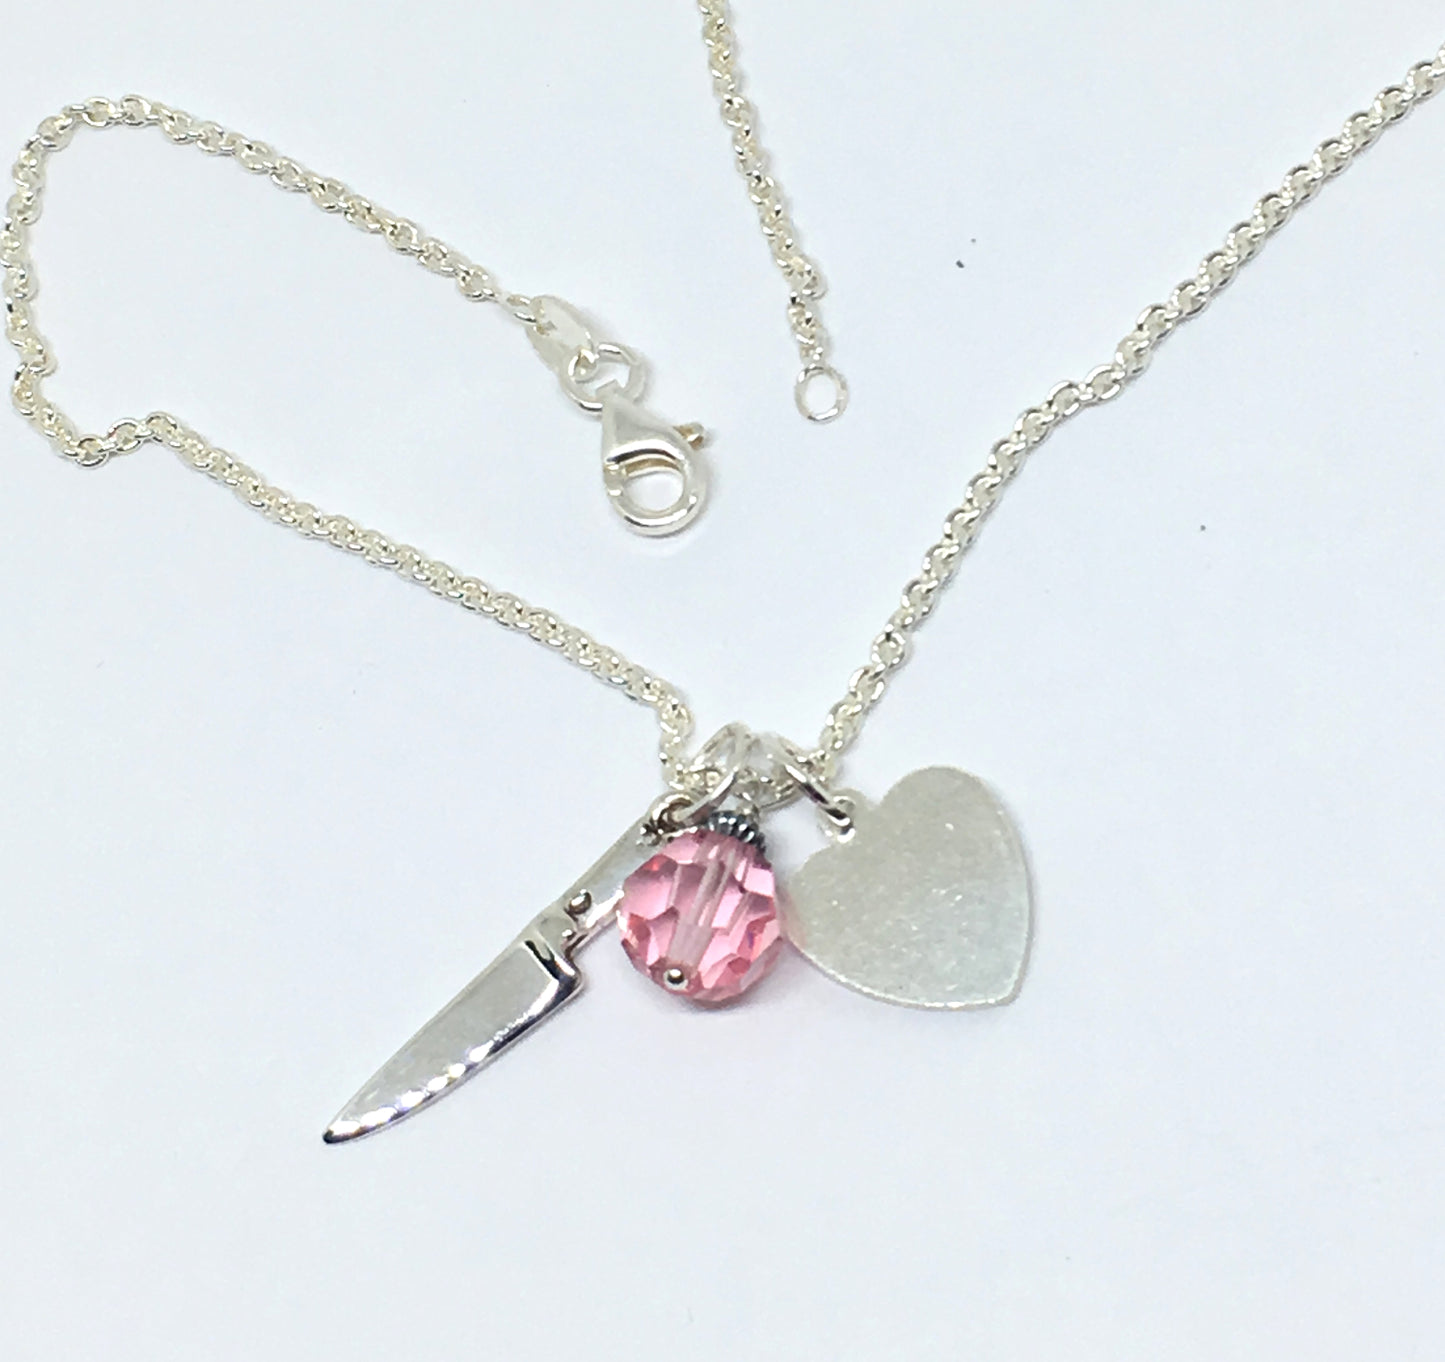 Personalized Chef Knife Cluster Necklace with Initials and Pink Swarovski Crystal